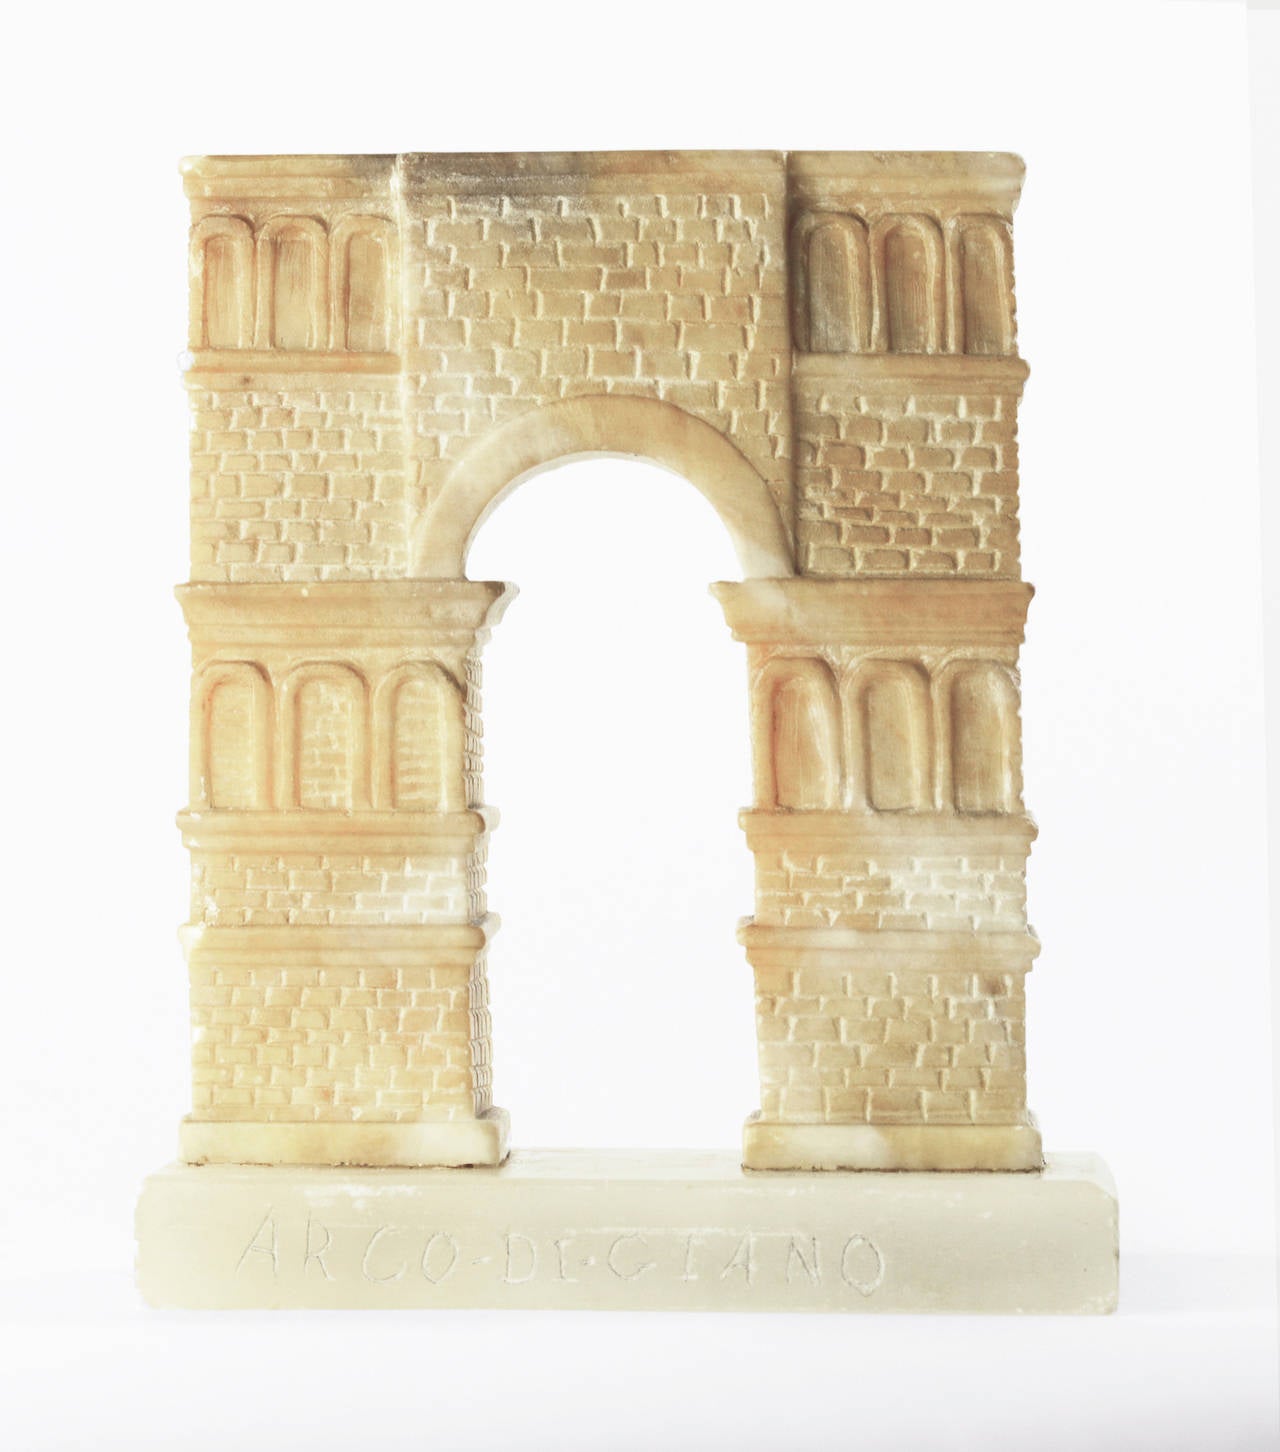 While 19th century souvenir architectural models (like those today) often focus on the same few subjects in Rome, these include the Pantheon, Forum ruins and Colosseum (in New York, the Empire State Building and Statue of Liberty) there is the